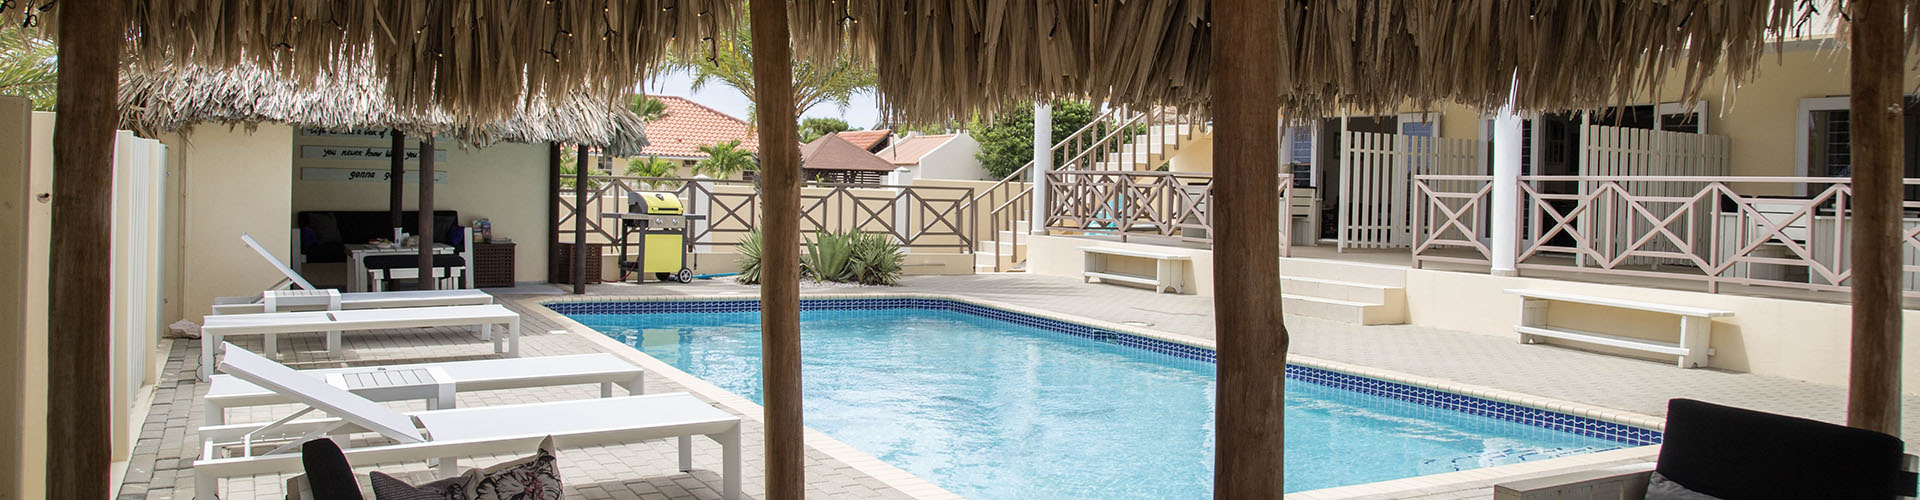 Vacation accommodations Curacao on a resort